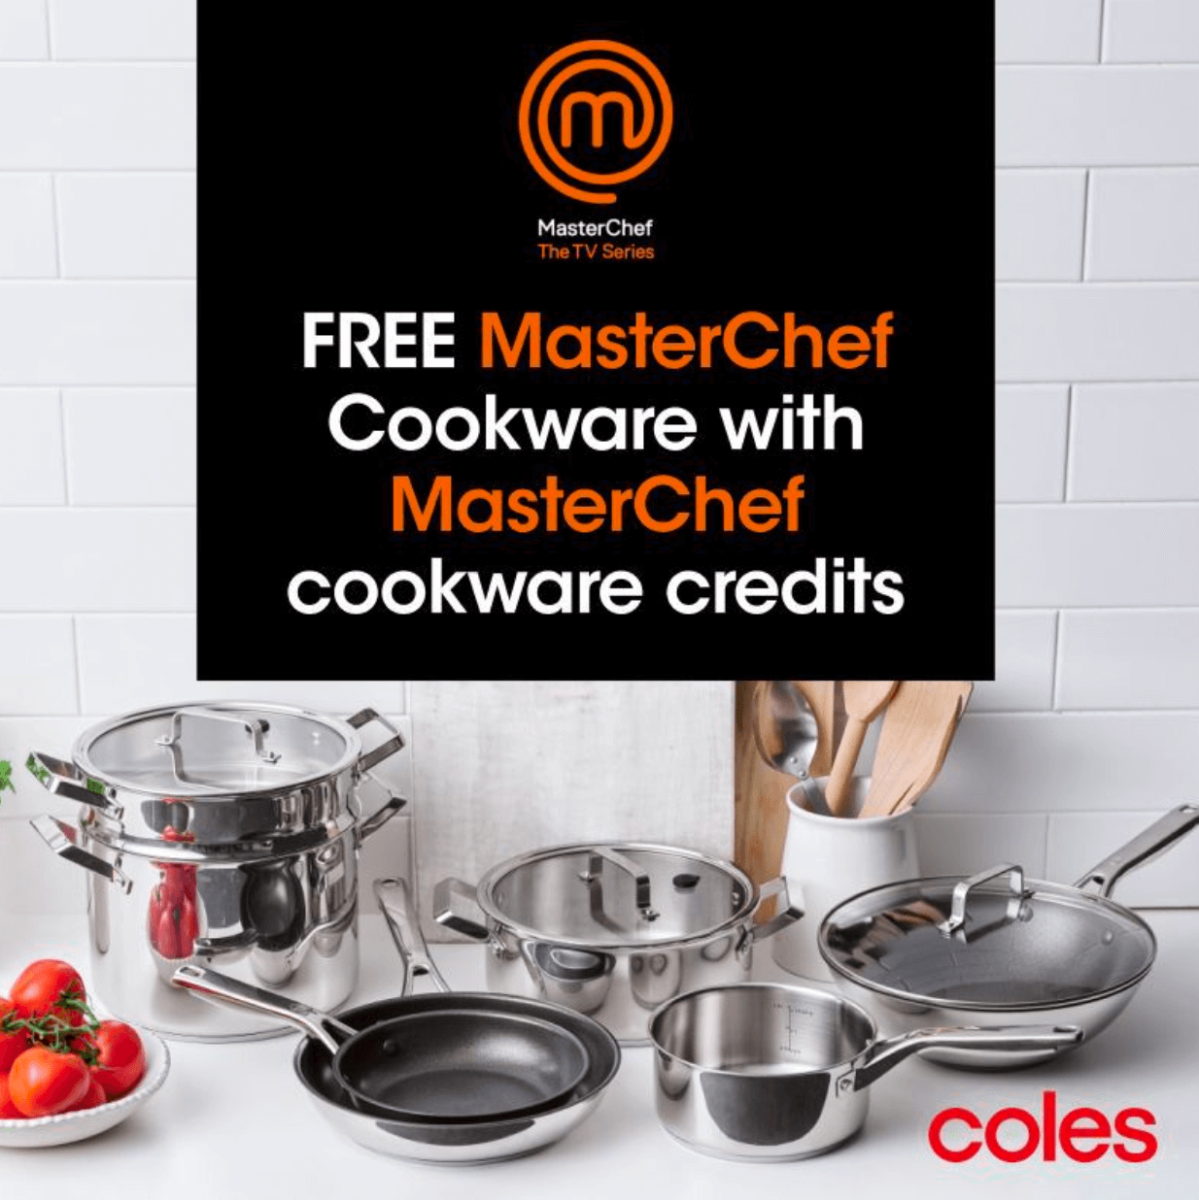 Coles unveils MasterChef-approved cookware so you can take your home  cooking up a notch! But are they worth the hype?